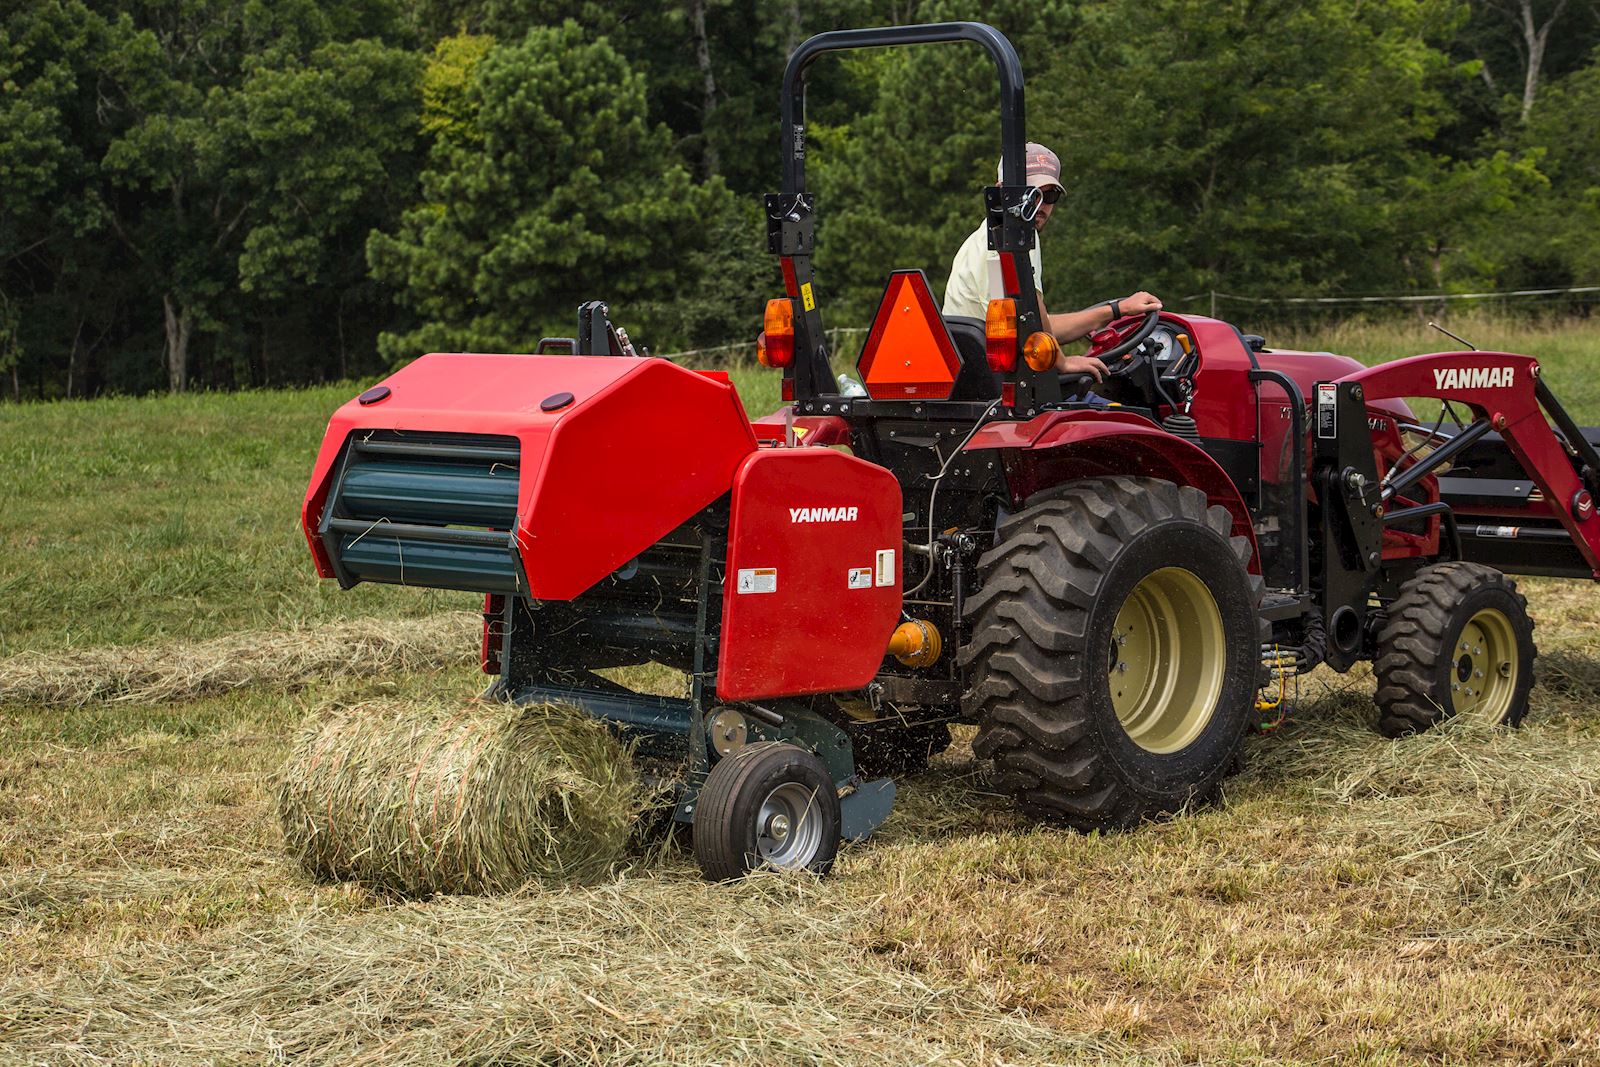 Round Balers Hay and Forage Equipment For Sale in New Zealand